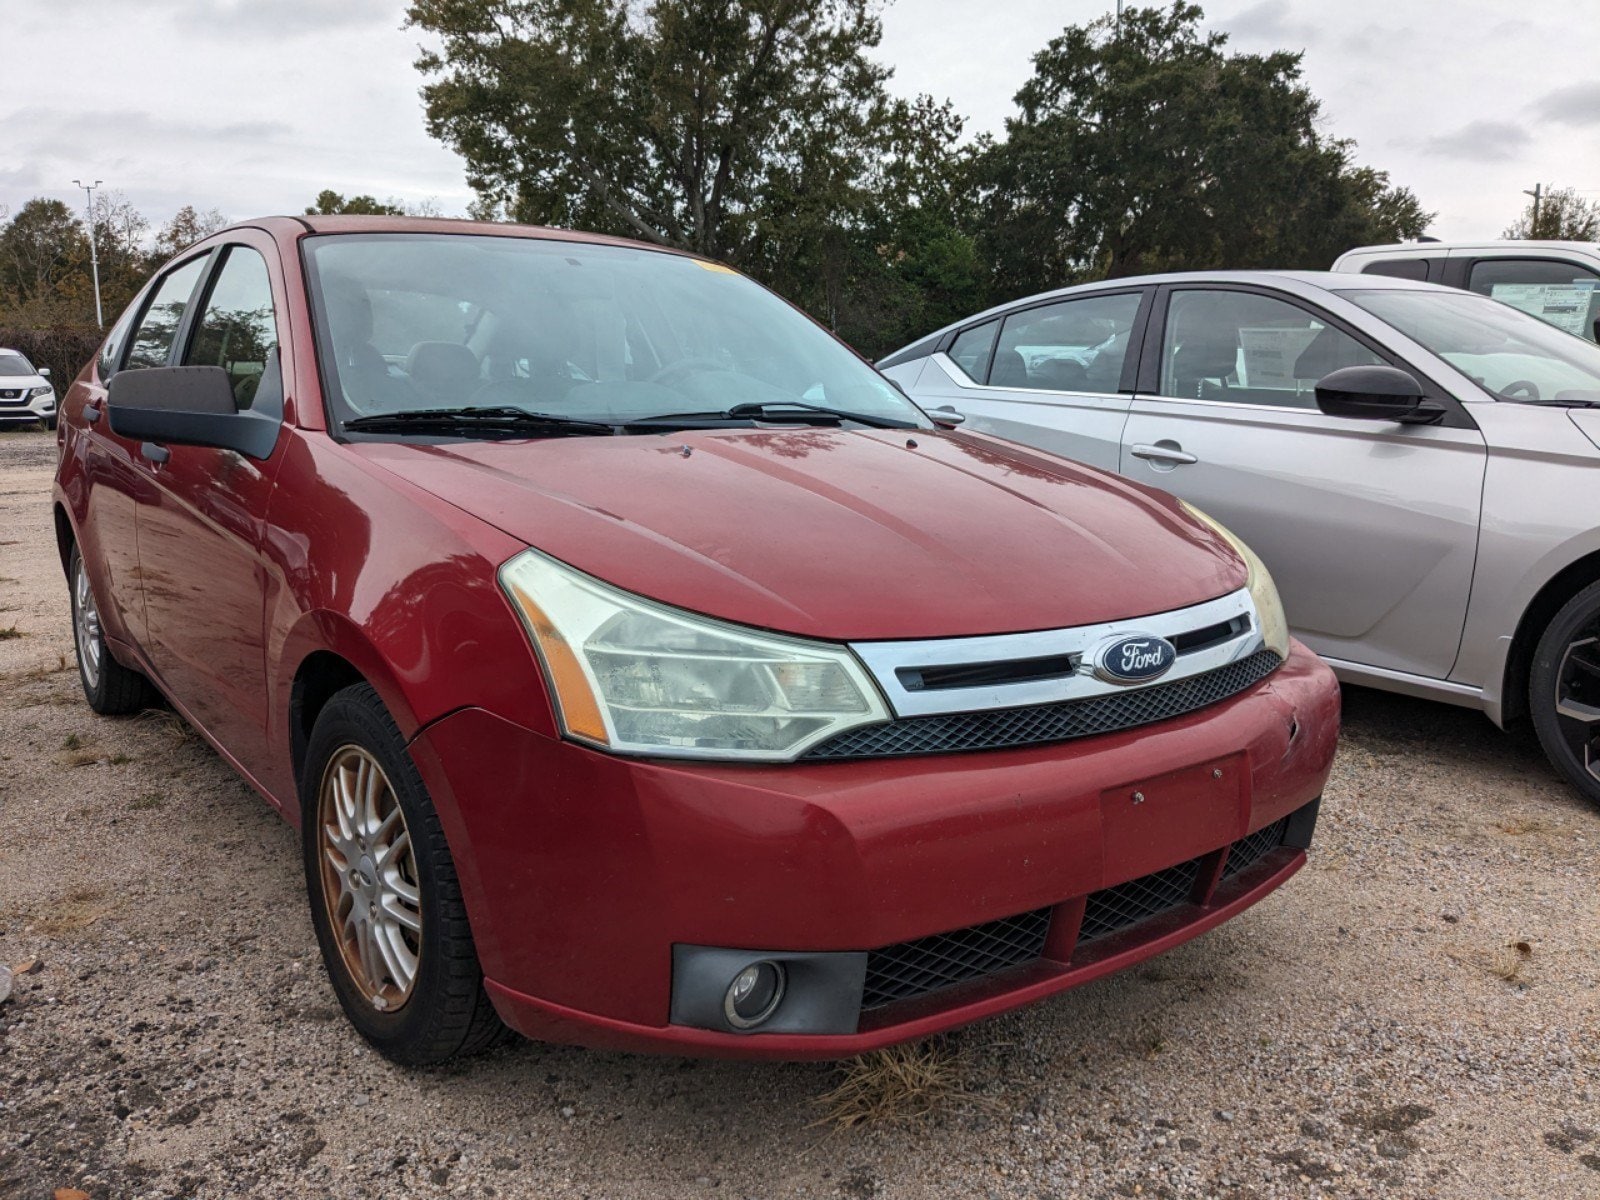 Used 2009 Ford Focus SE with VIN 1FAHP35N49W127774 for sale in Pensacola, FL